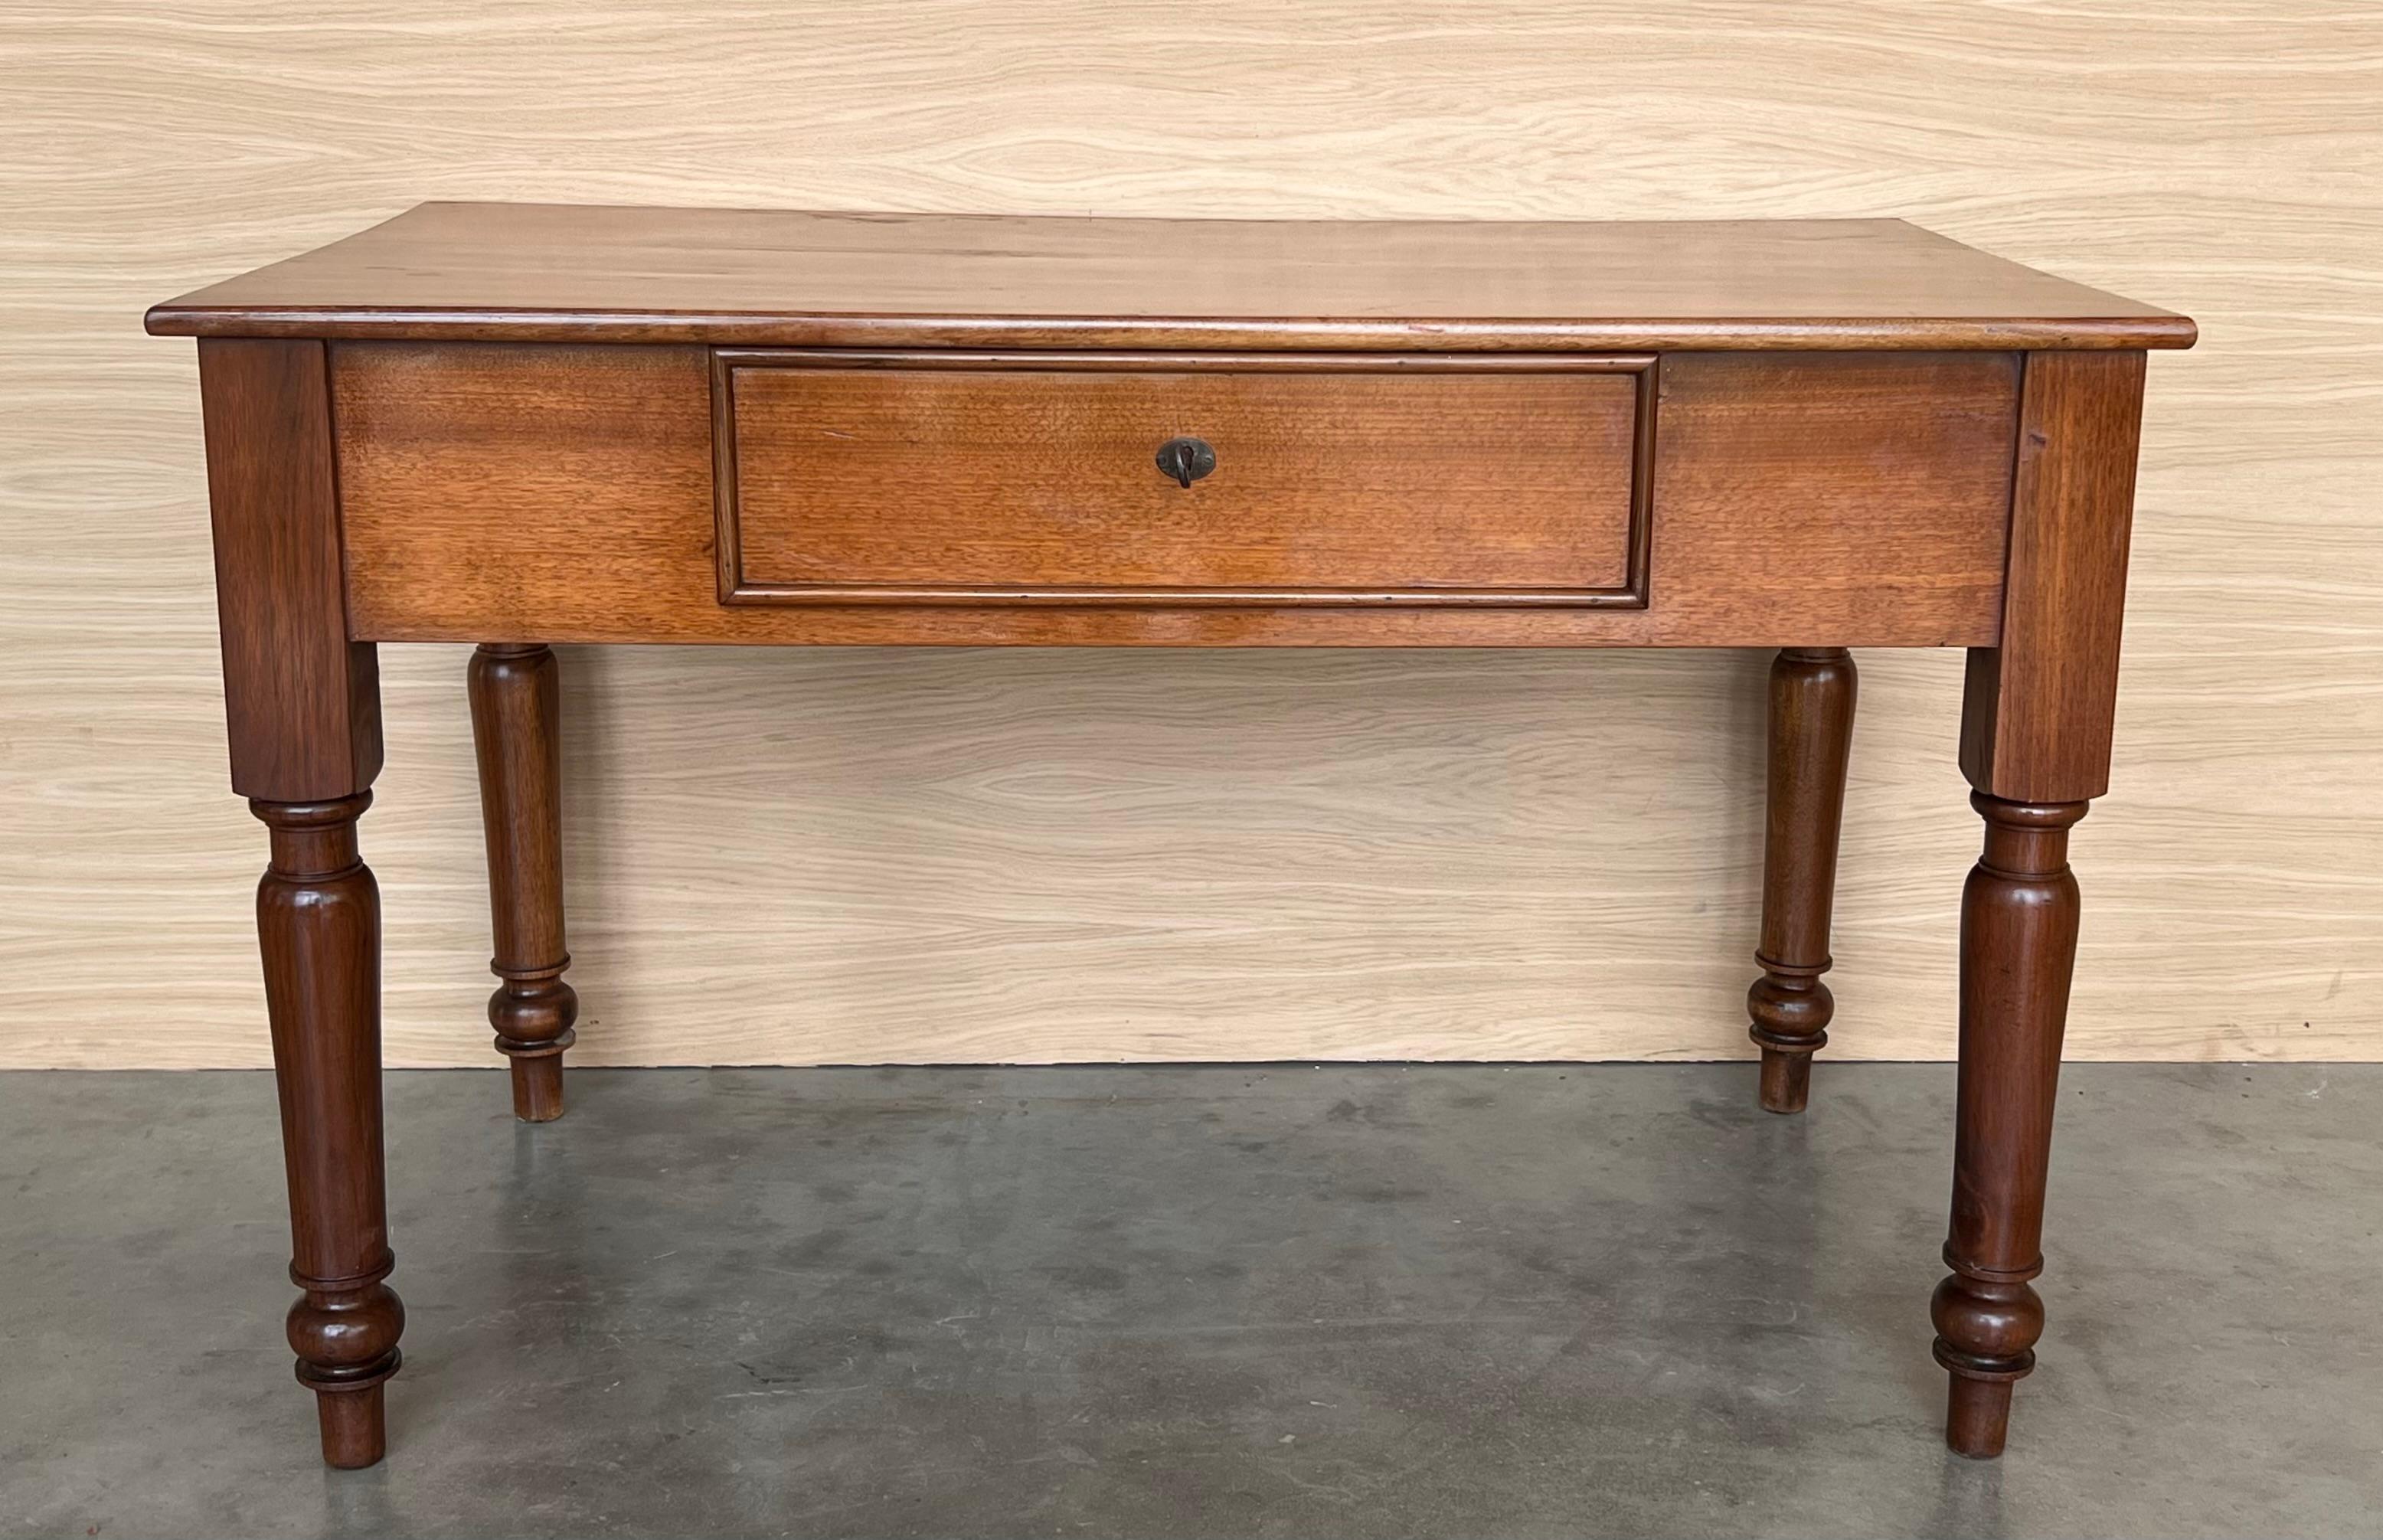 This elegant fruitwood desk was created in France, circa 1920. Made of blond walnut timber, the large writing table sits on four  legs The front has a wide opening with plenty of knee space and the back is embellished perfectly finished. The writing